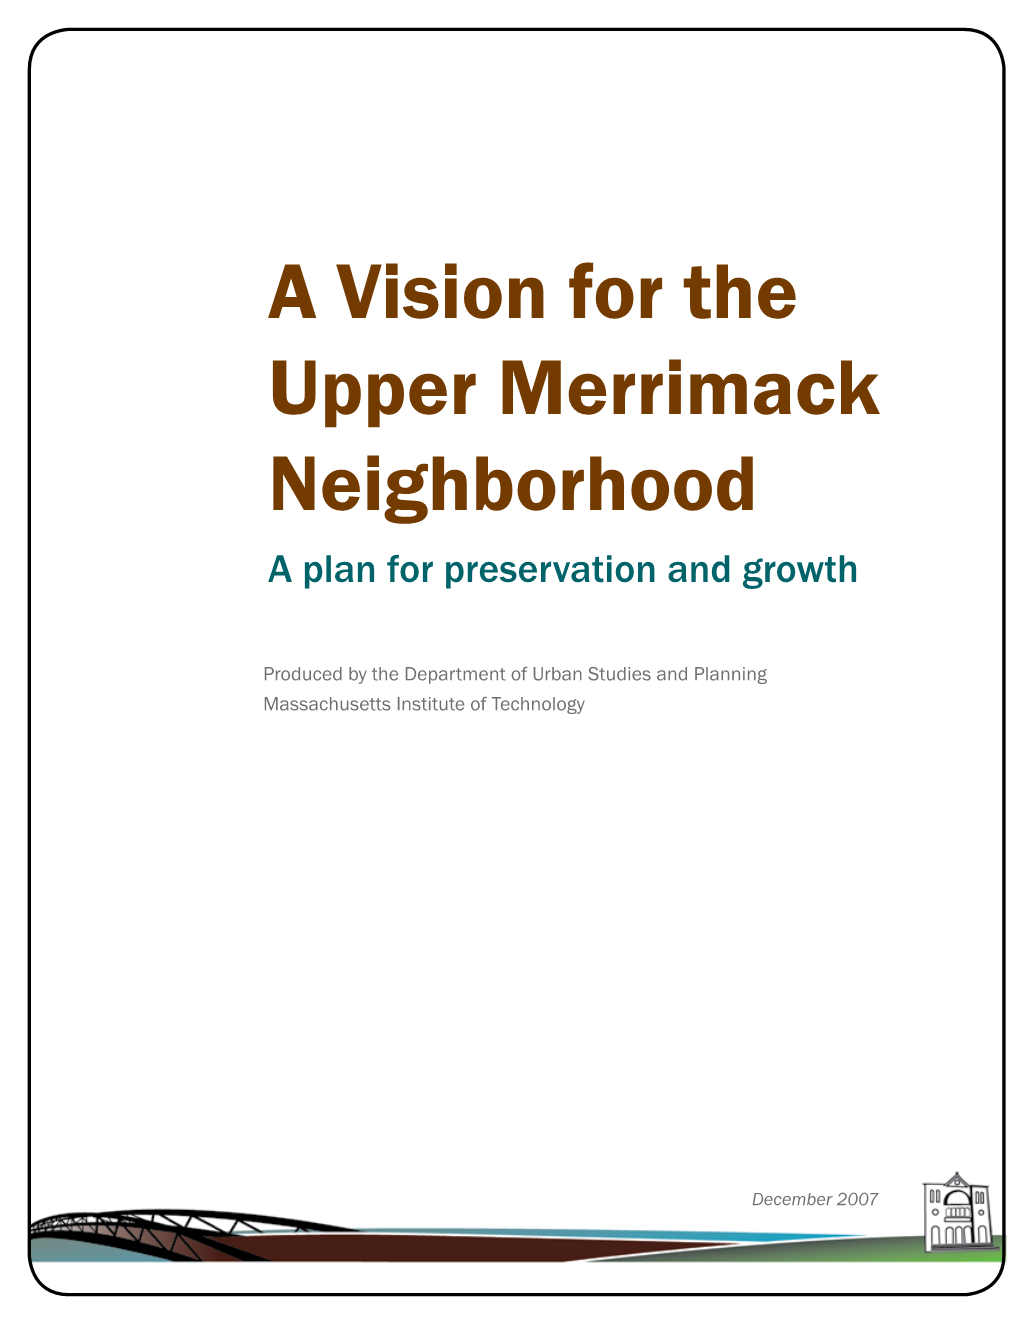 A Vision for the Upper Merrimack Neighborhood a Plan for Preservation and Growth